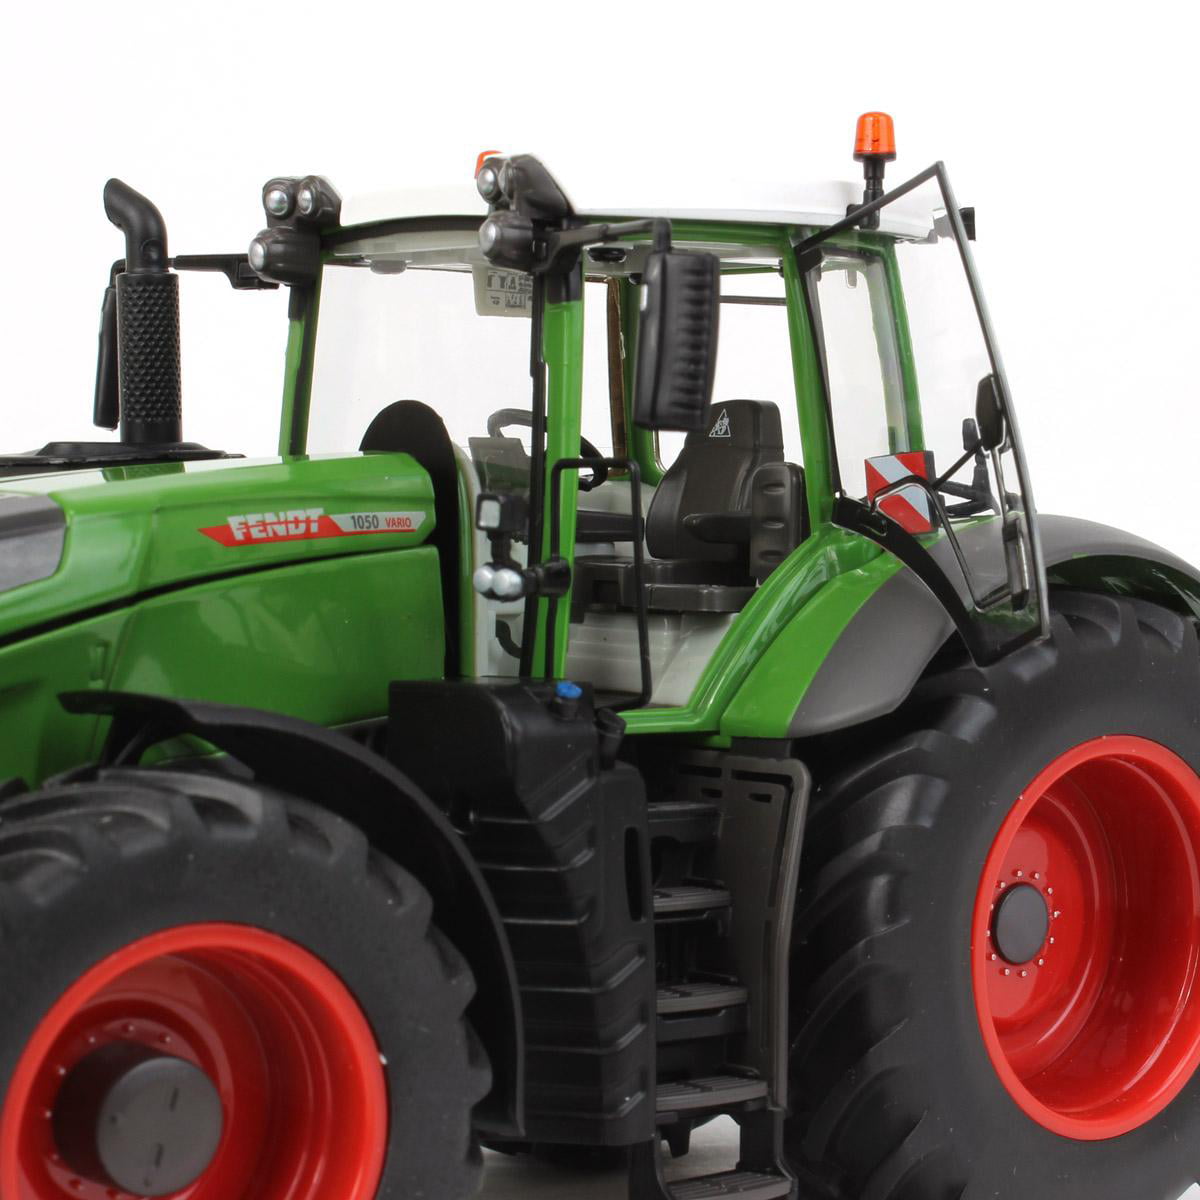 Wiking 1/32 Fendt 1050 Vario Tractor with MFD Wiking-077864